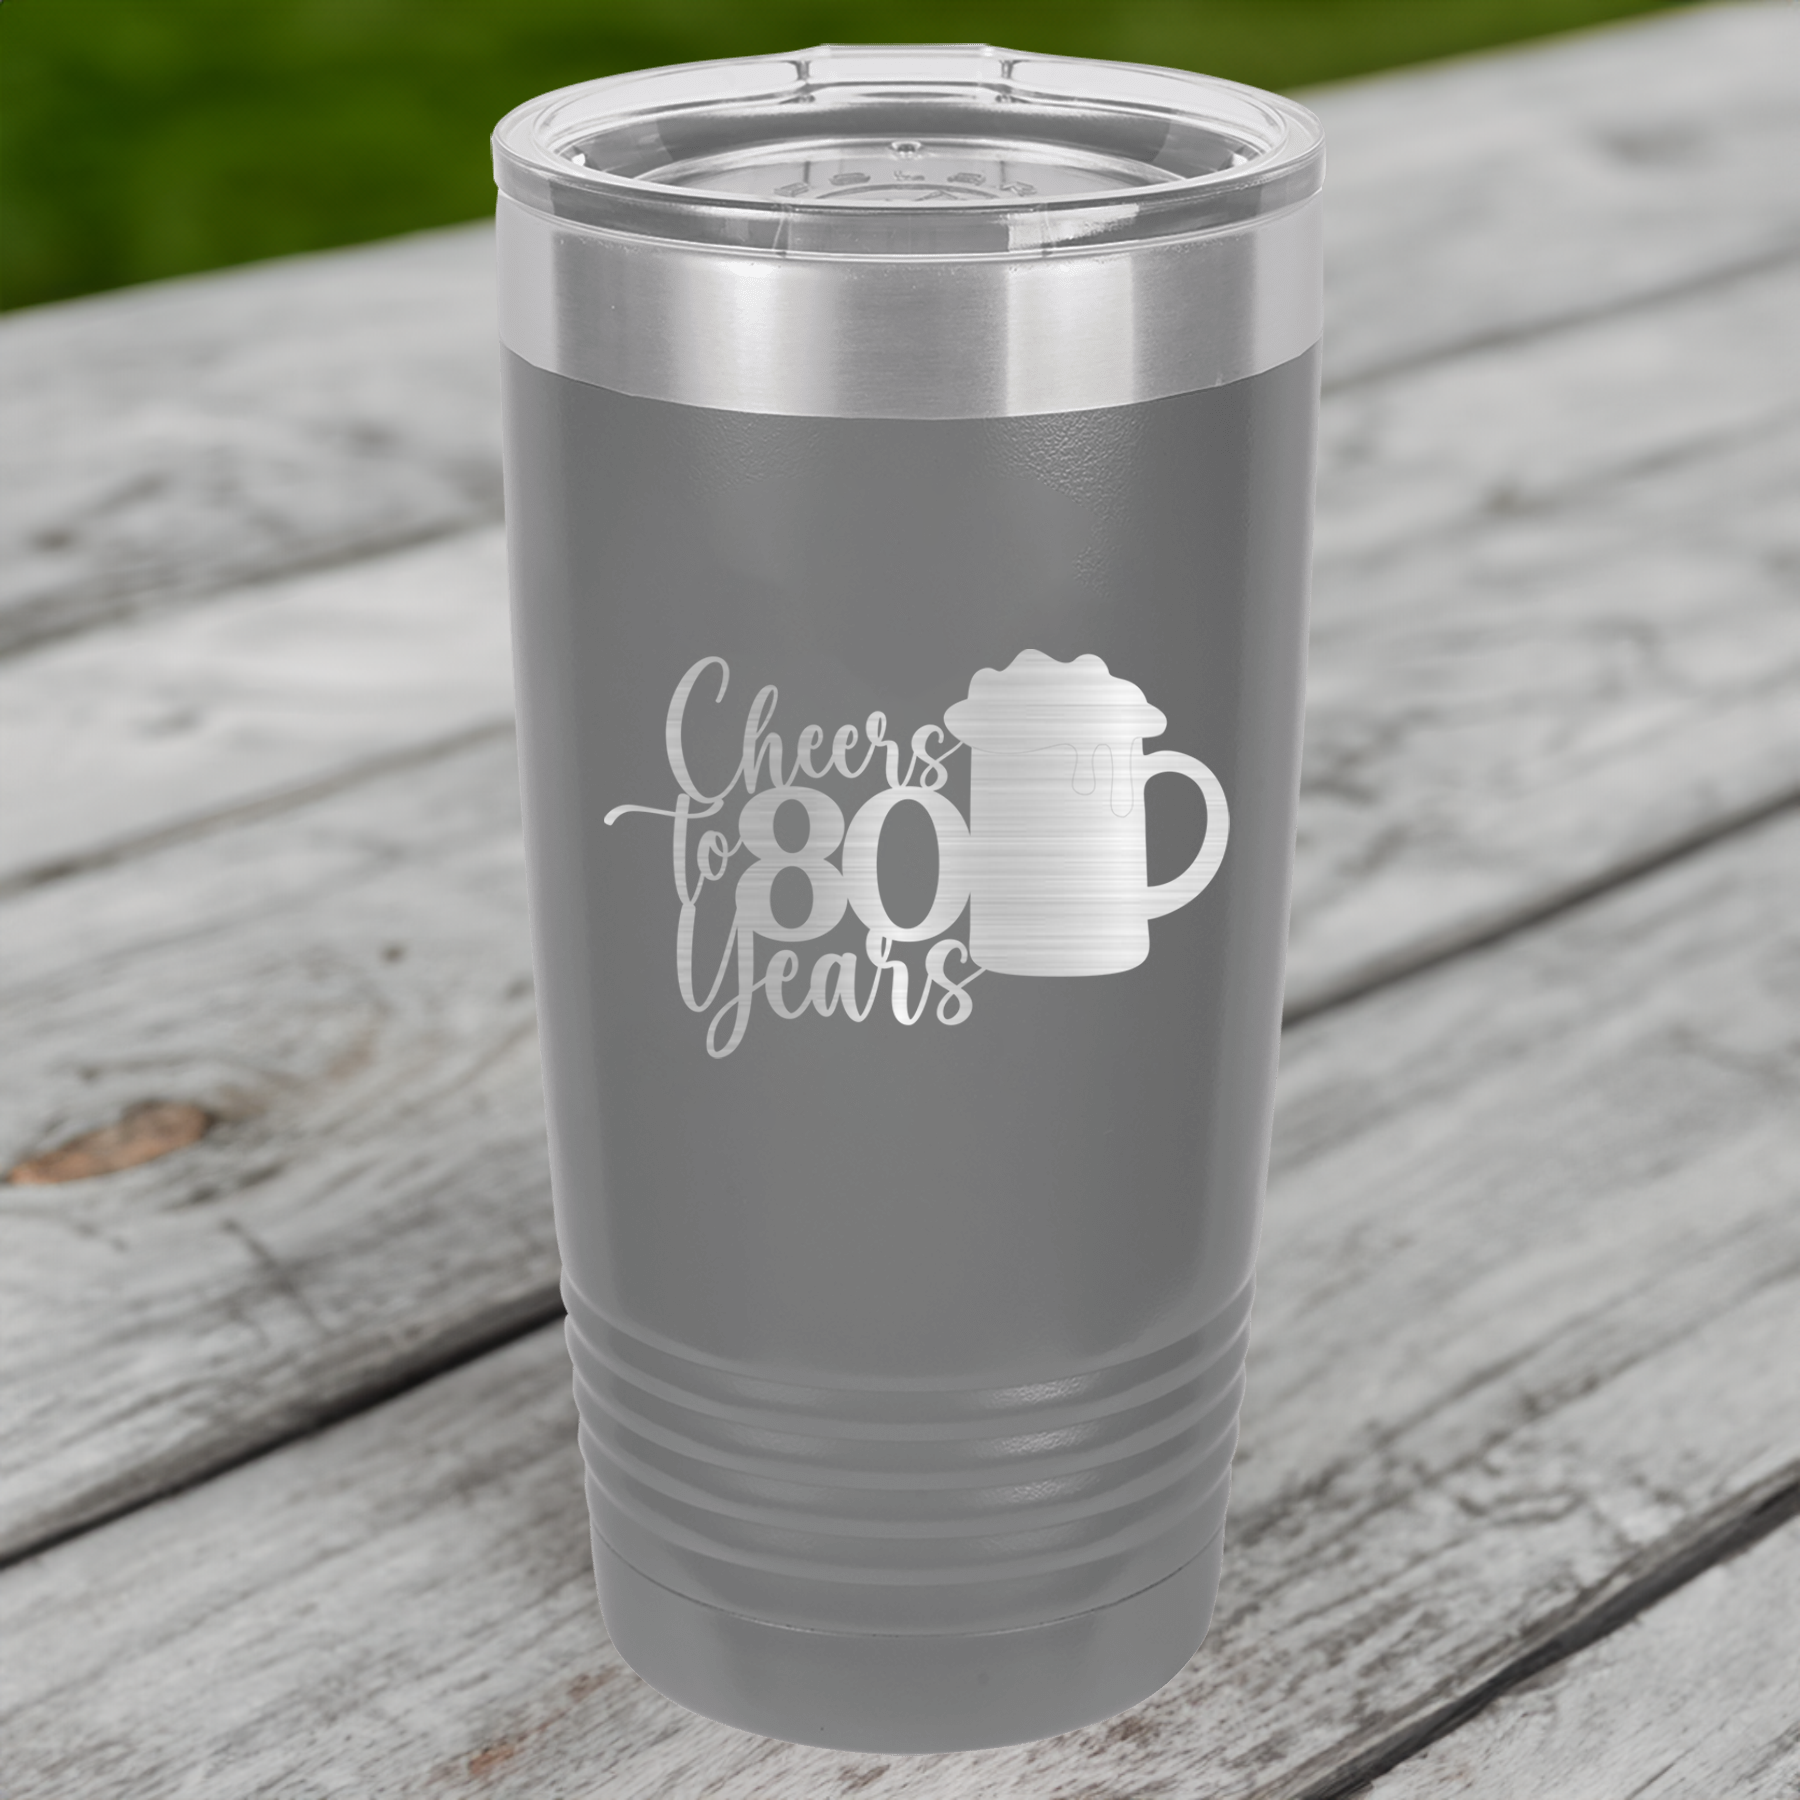 Funny Cheers to 80 Years Beer Ringed Tumbler